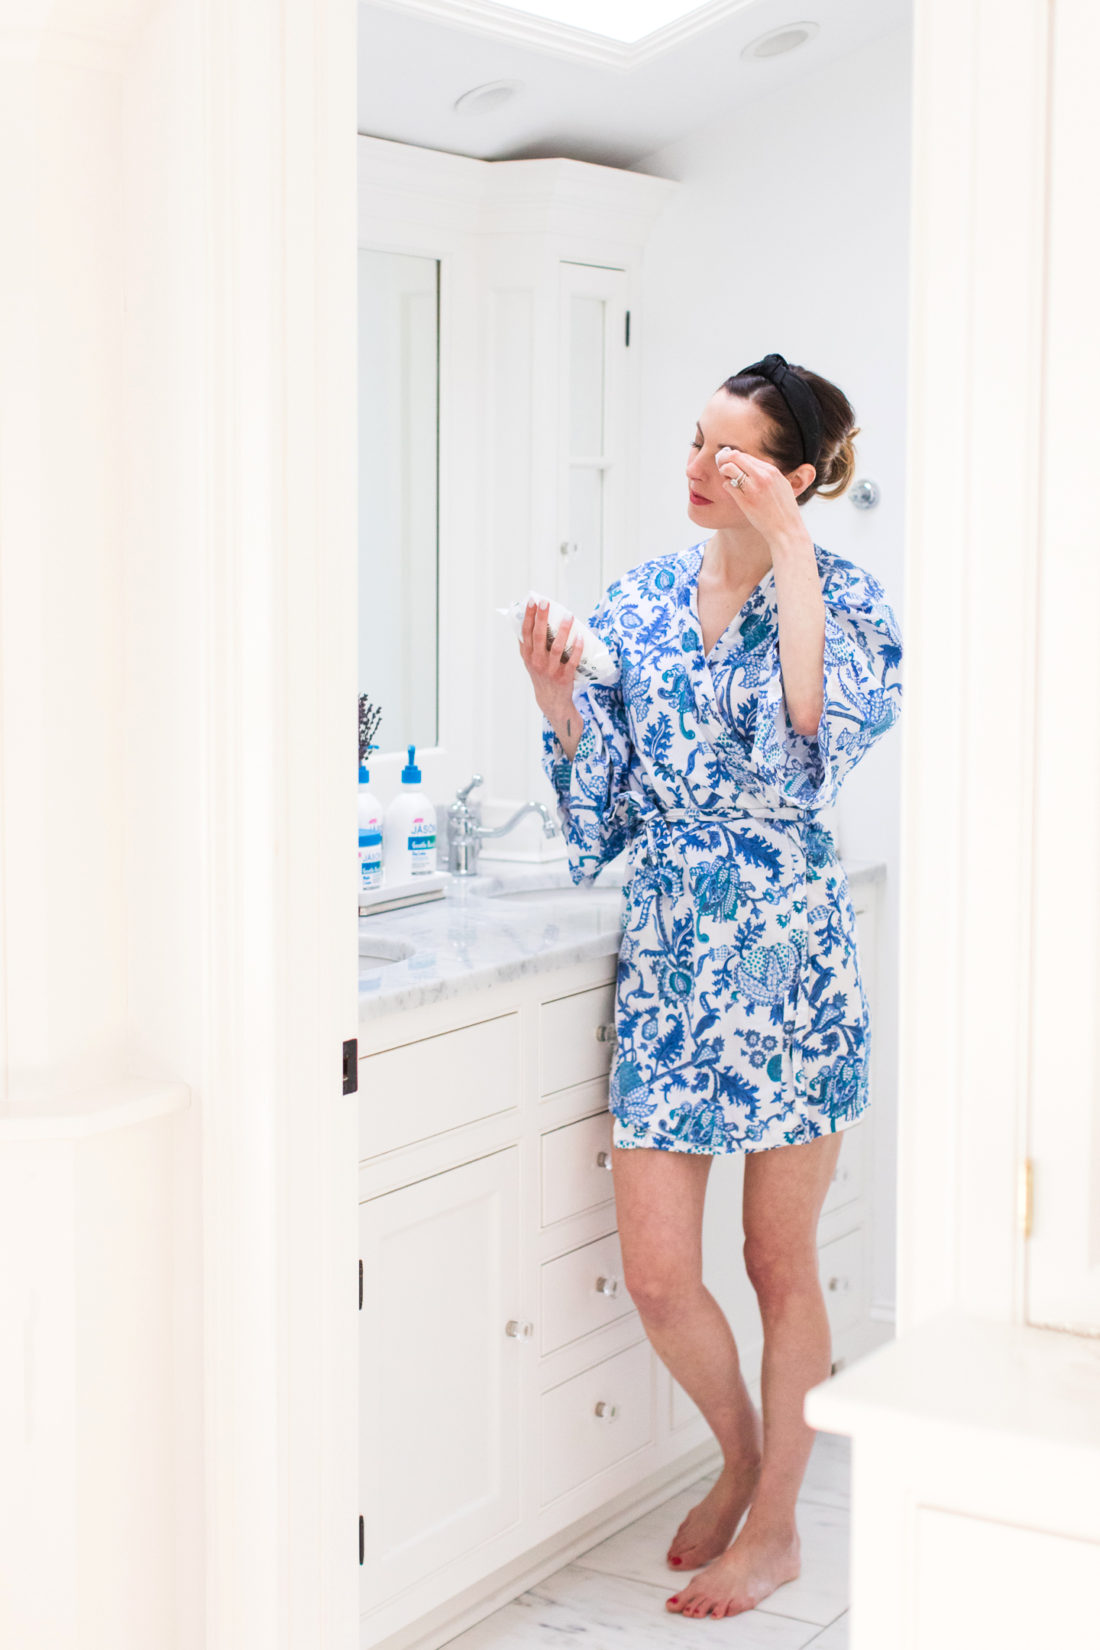 Eva Amurri Martino stands in her Master Bathroom using a Gentle Basics cleansing wipe to remove her makeup before bed